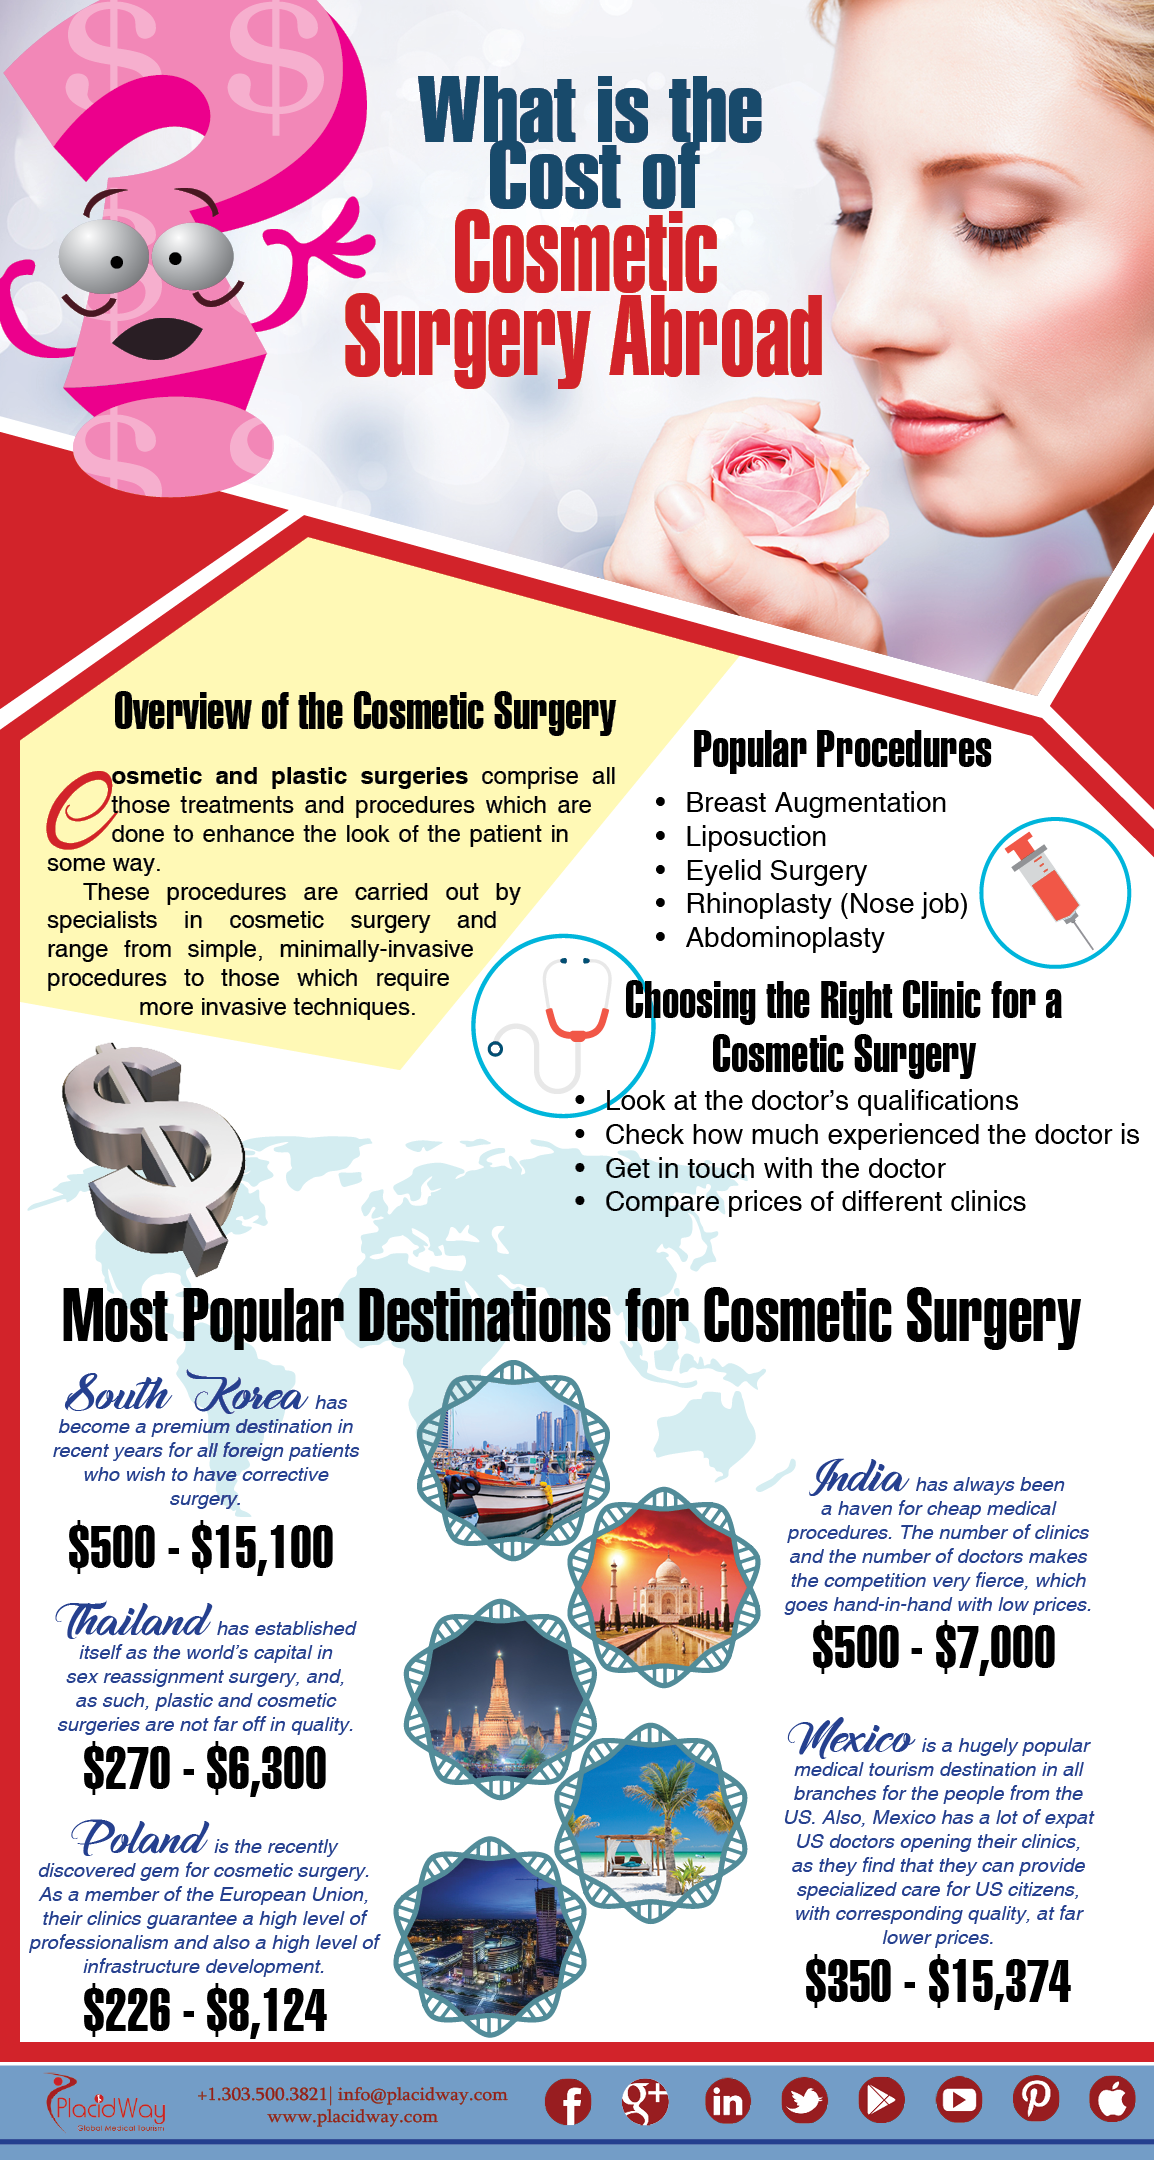 About Cosmetic Surgery Abroad